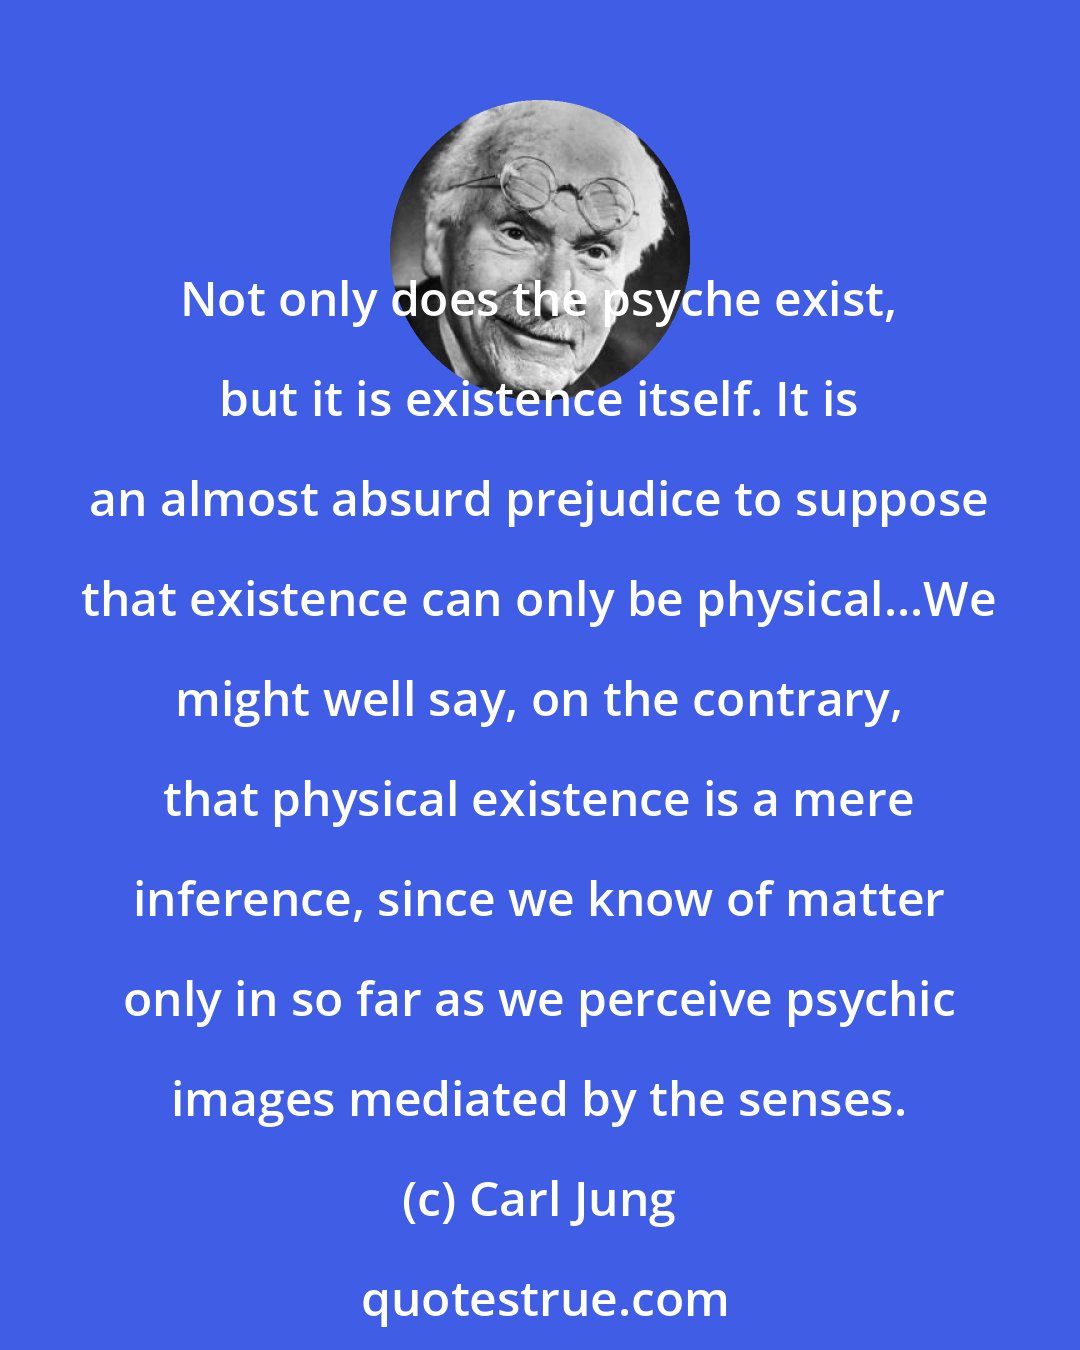 Carl Jung: Not only does the psyche exist, but it is existence itself. It is an almost absurd prejudice to suppose that existence can only be physical...We might well say, on the contrary, that physical existence is a mere inference, since we know of matter only in so far as we perceive psychic images mediated by the senses.